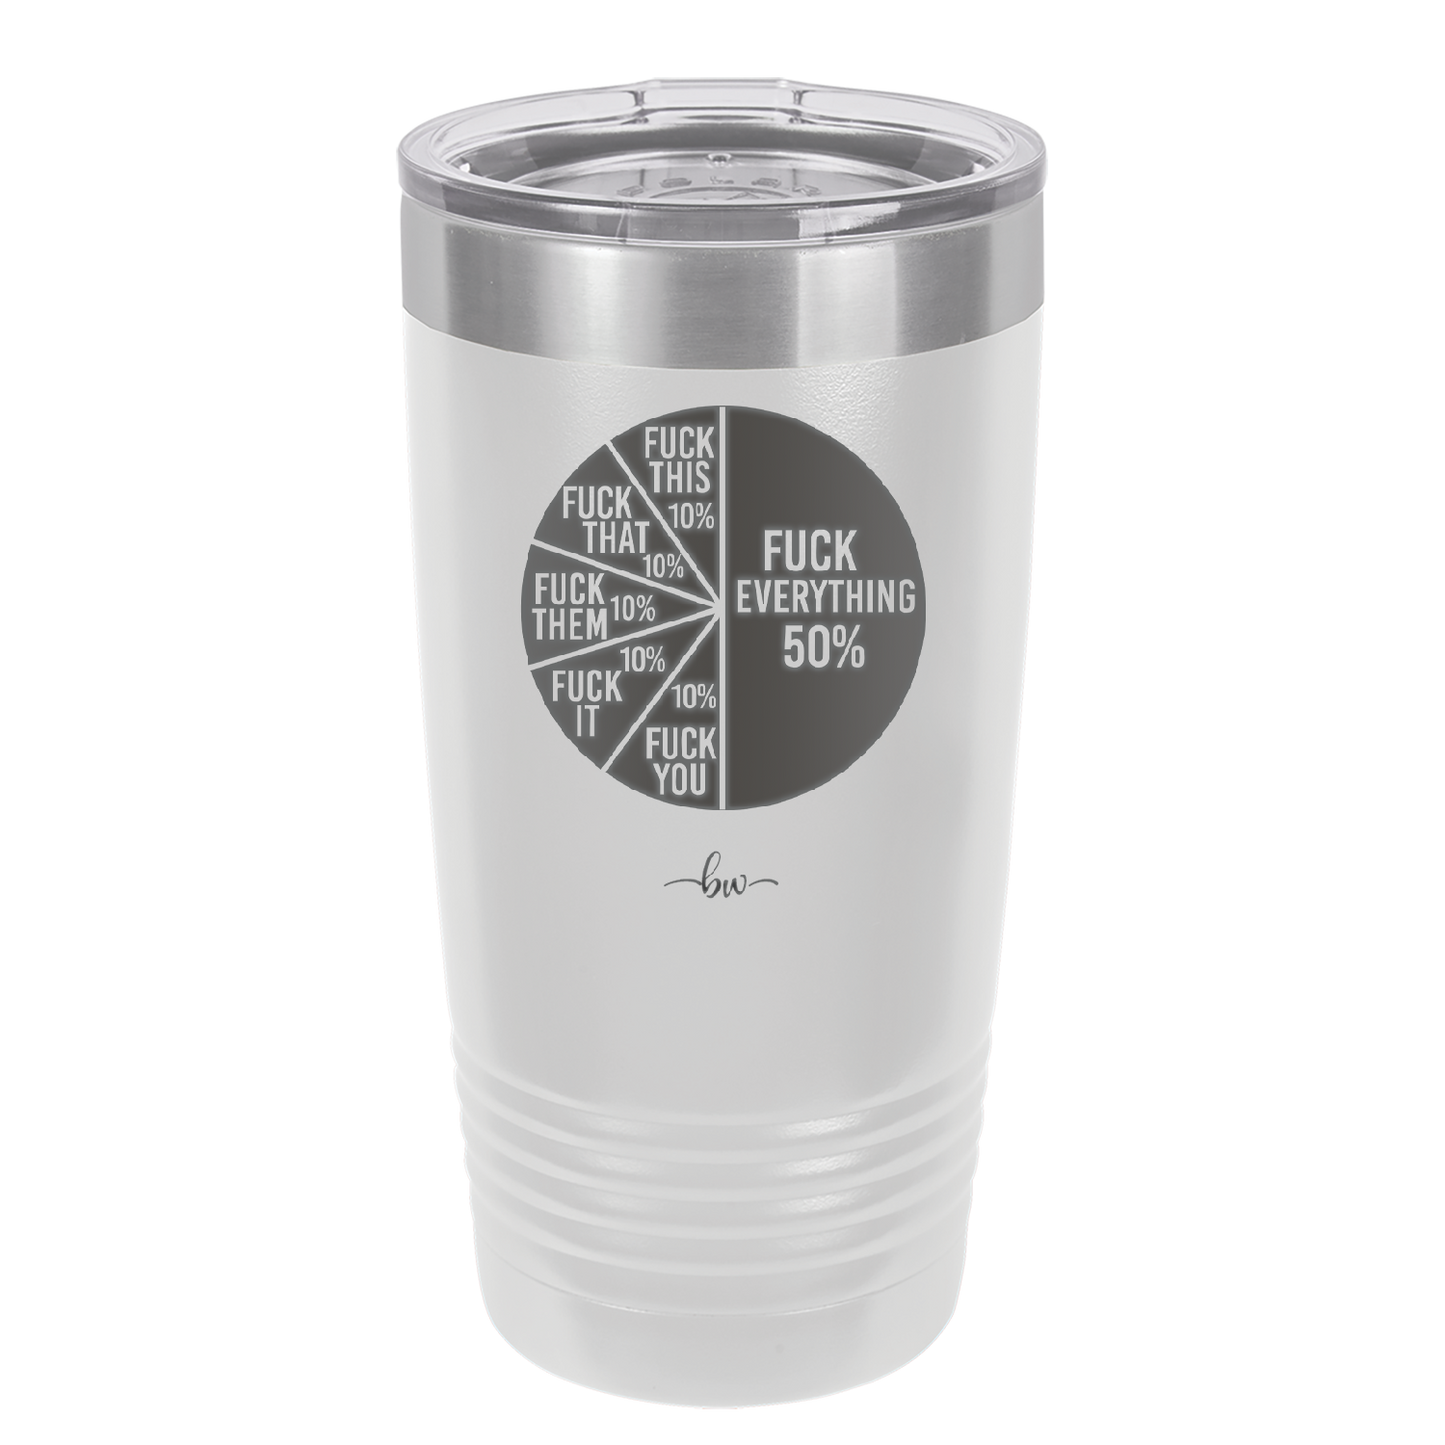 Fuck This That Them It You Everything Pie Chart - Laser Engraved Stainless Steel Drinkware - 2293 -